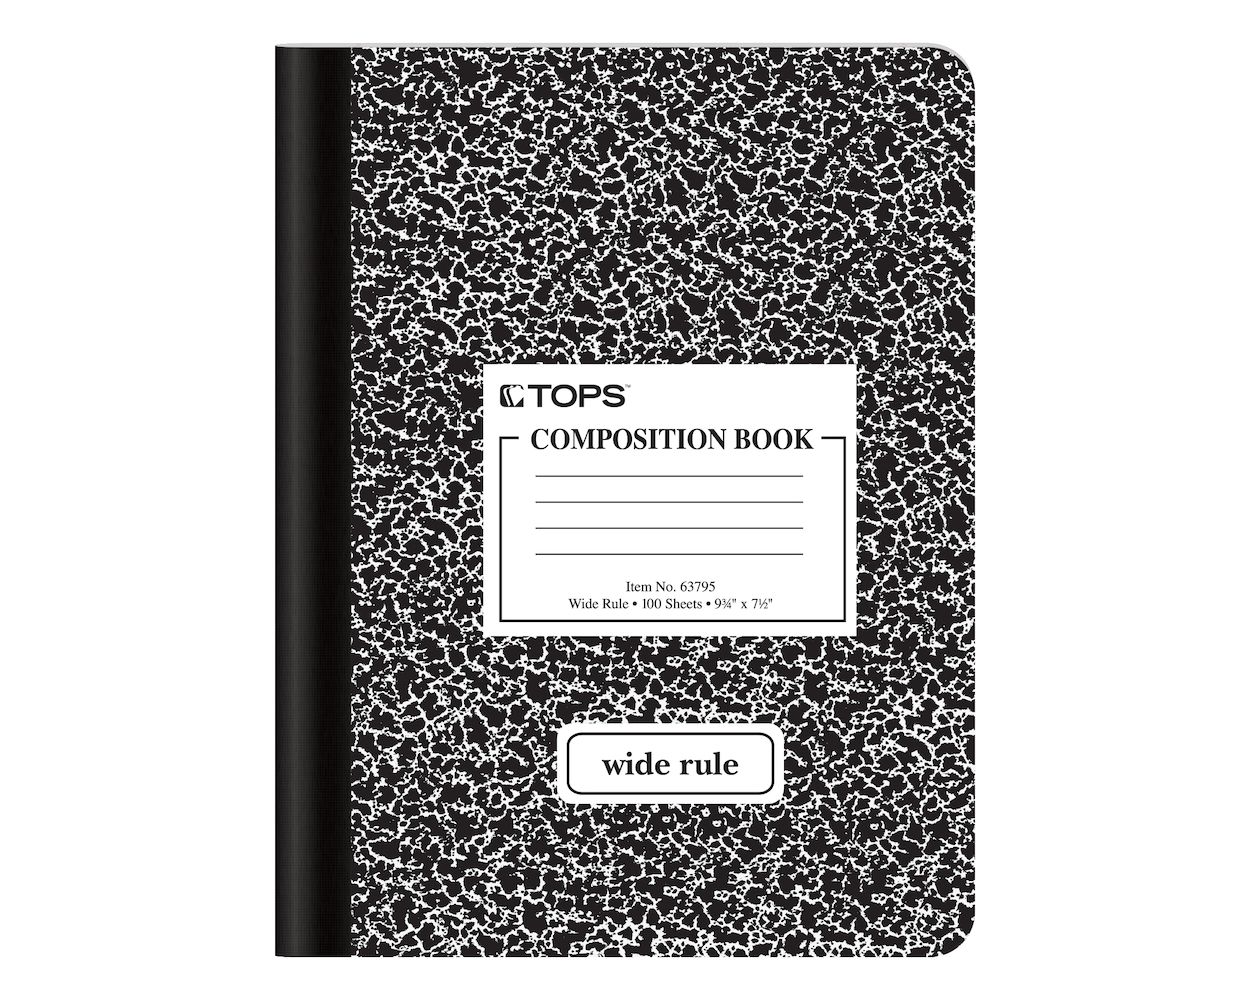 TOPS Composition Book, 9-3/4" x 7-1/2", Wide Rule, Black Marble Cover, 100  Sheets